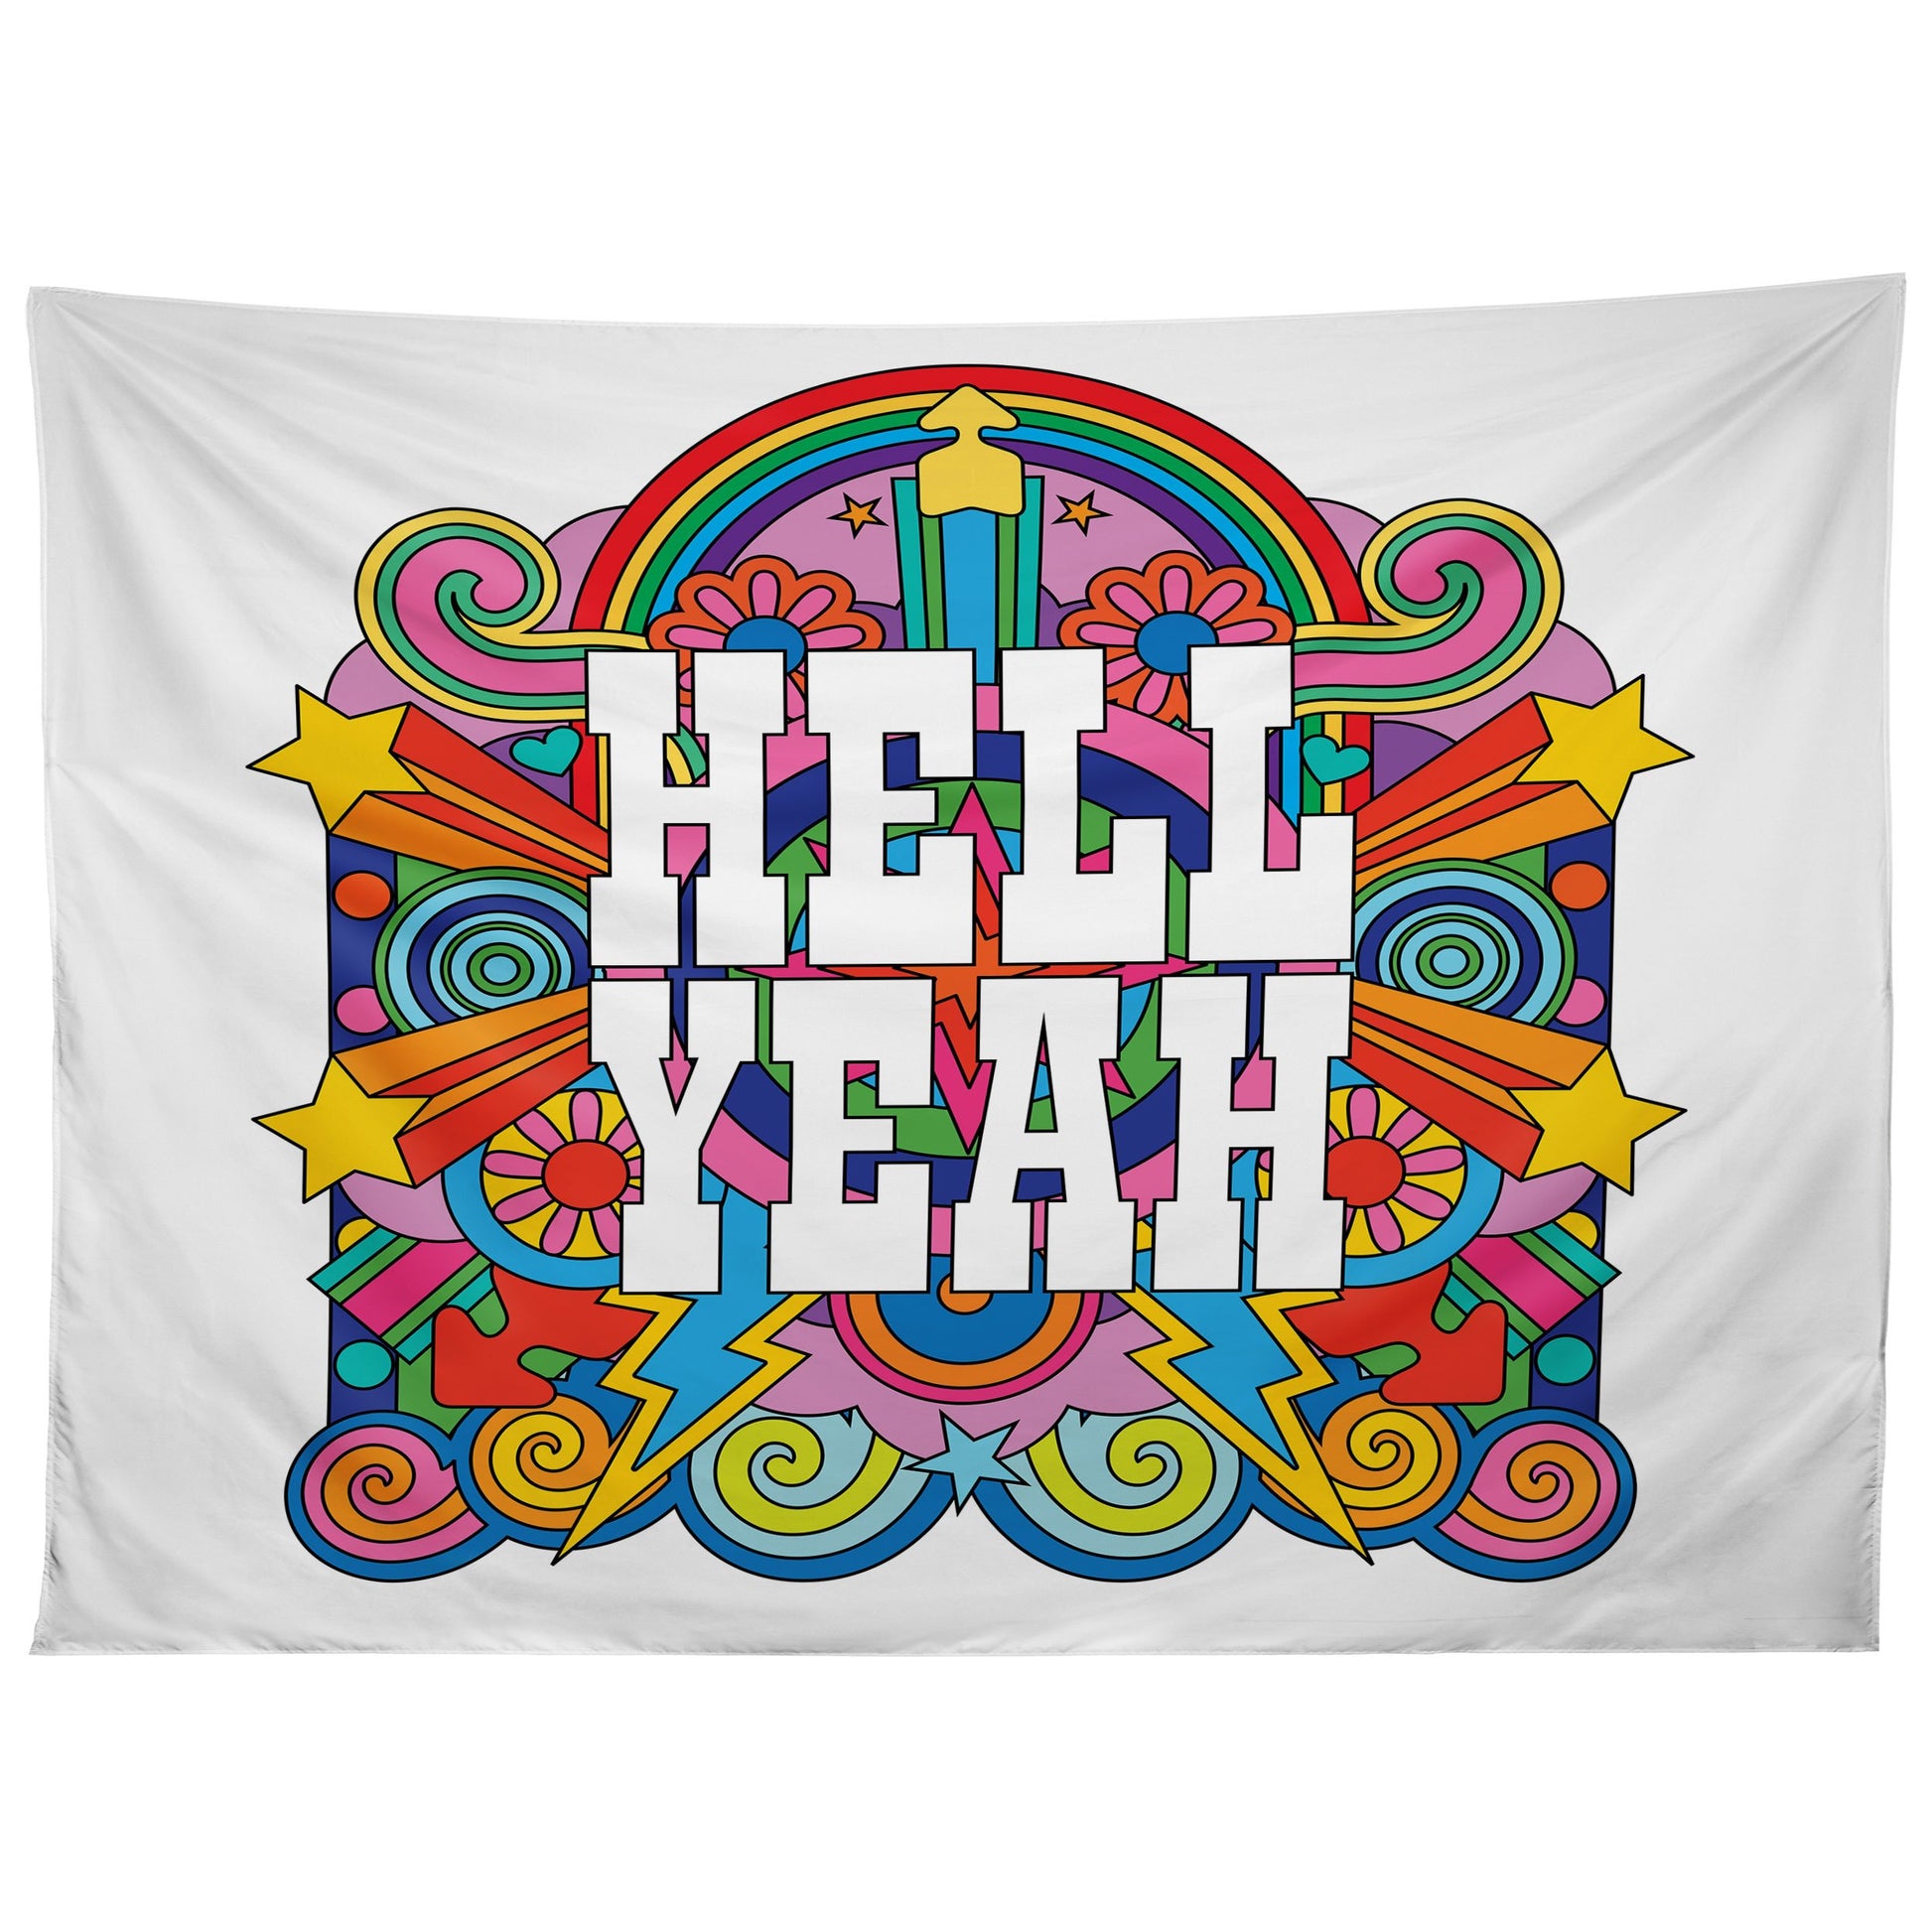 HELL YEAH Tapestry choice of sizes - cactus, classic western, cowgirl, decor, desert, HELL, hell yeah, hellyeah, picture, south western, southwestern pattern, southwestern print, southwestern style, southwestern., southwesterndecor, southwesternhome, southwesternhomedecor, southwesternprint, southwesterns, wall, walldecor, western, western accent, western design, western print, western scene, westernhime, westernhome, westernhomedecor, WESTERNPRINT, westerns, WESTERNT -  - Baha Ranch Western Wear